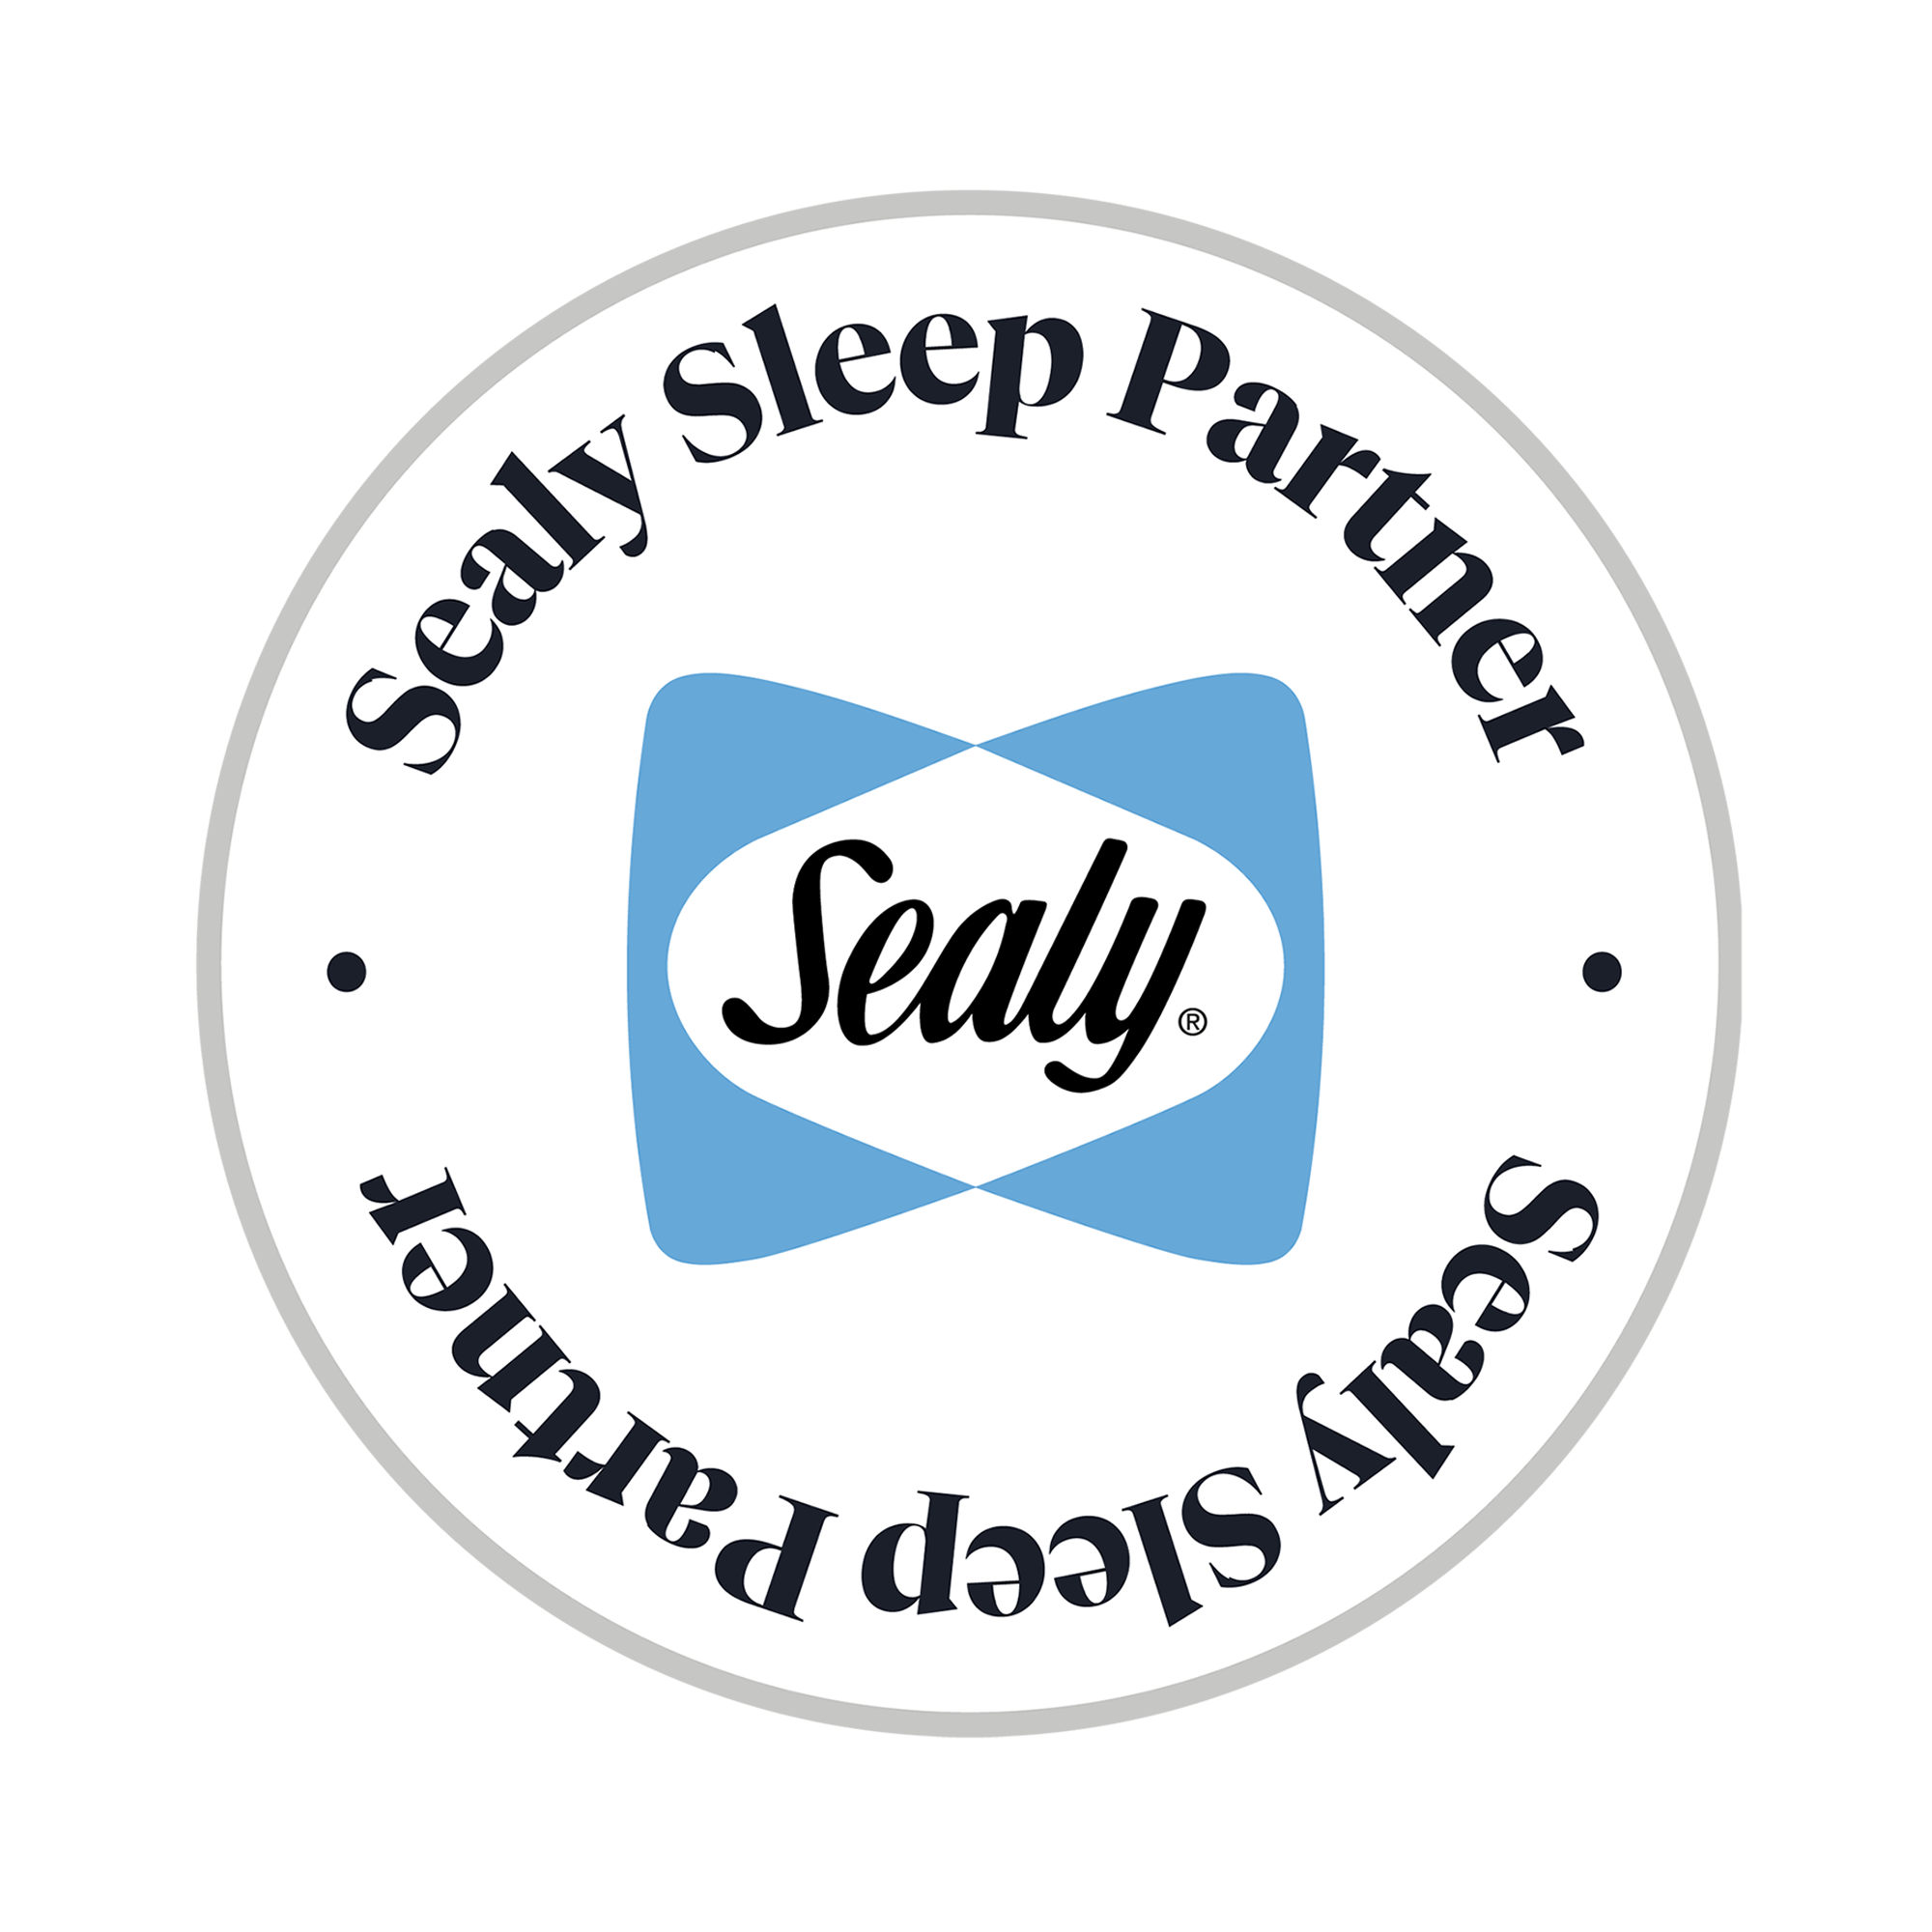 As a Sealy selected partner you can purchase with confidence